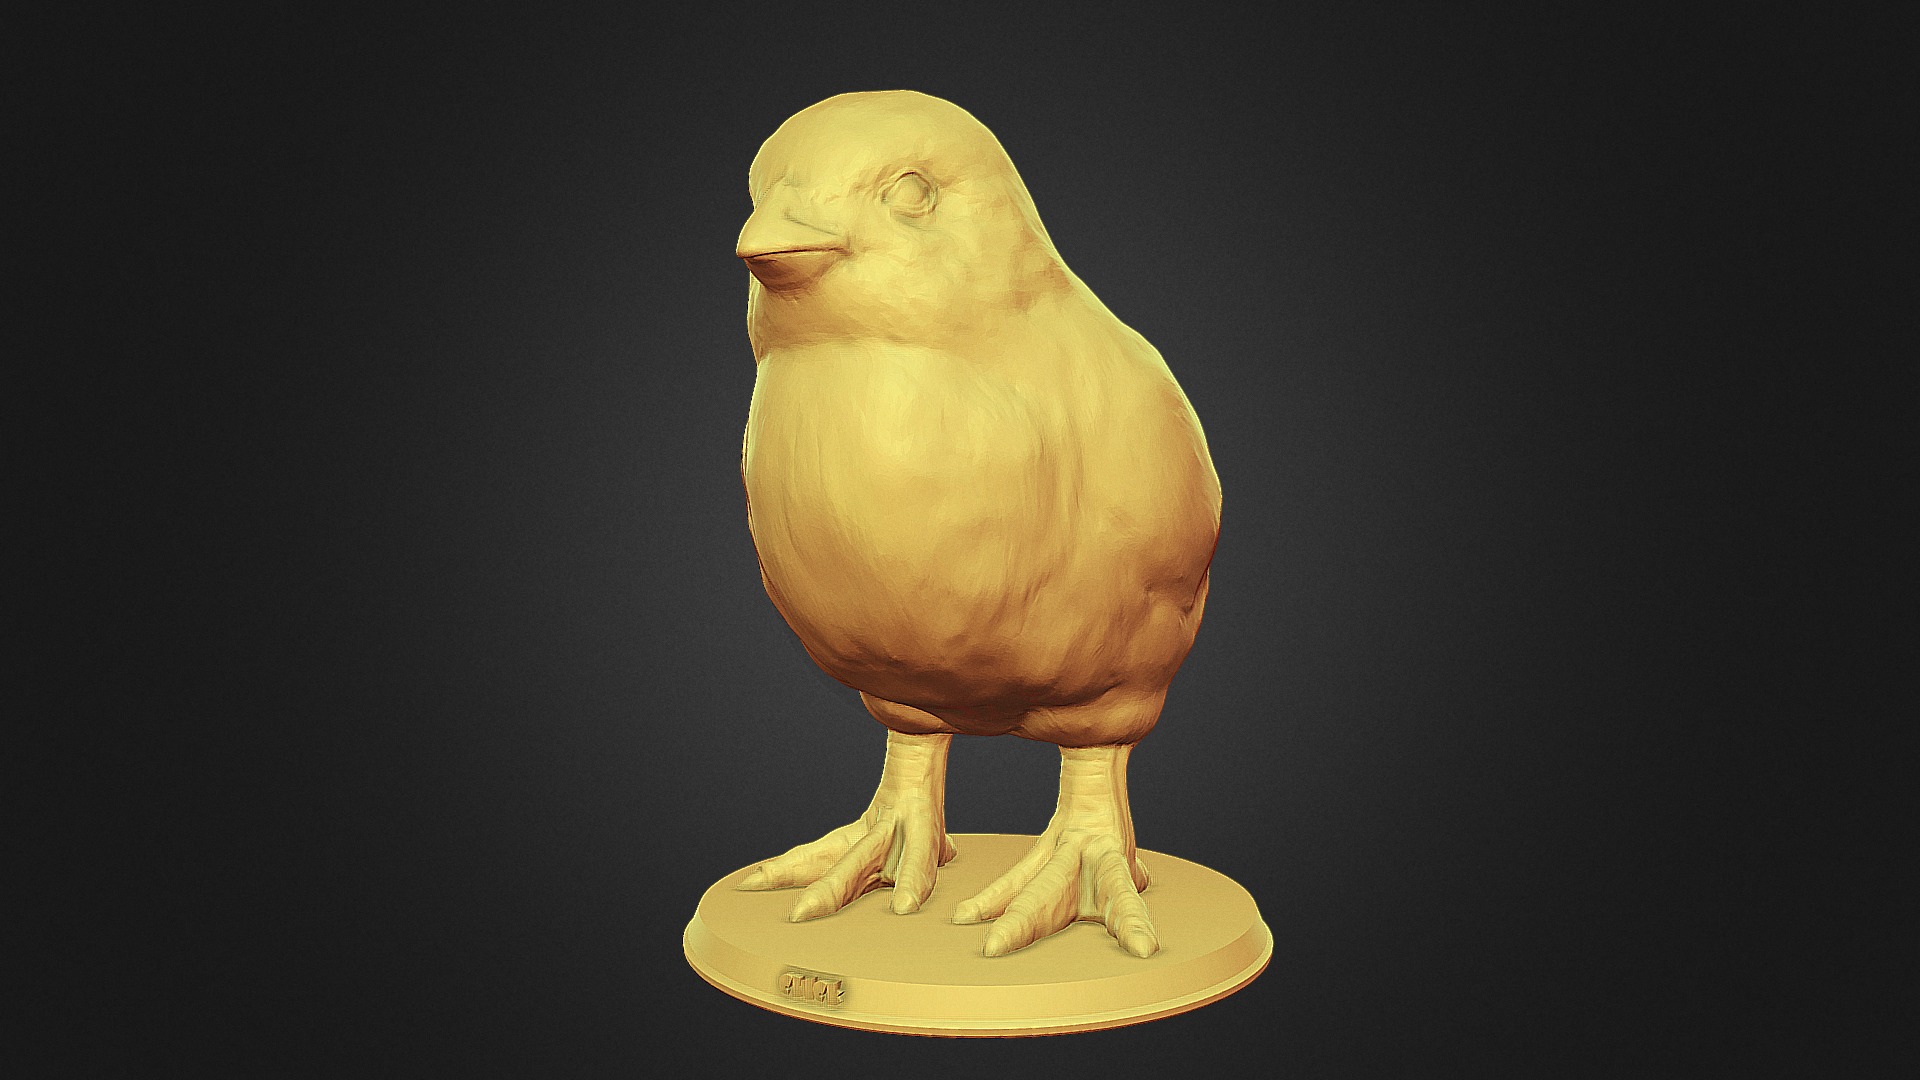 3D model Realistic Chick - This is a 3D model of the Realistic Chick. The 3D model is about a yellow duck on a black background.